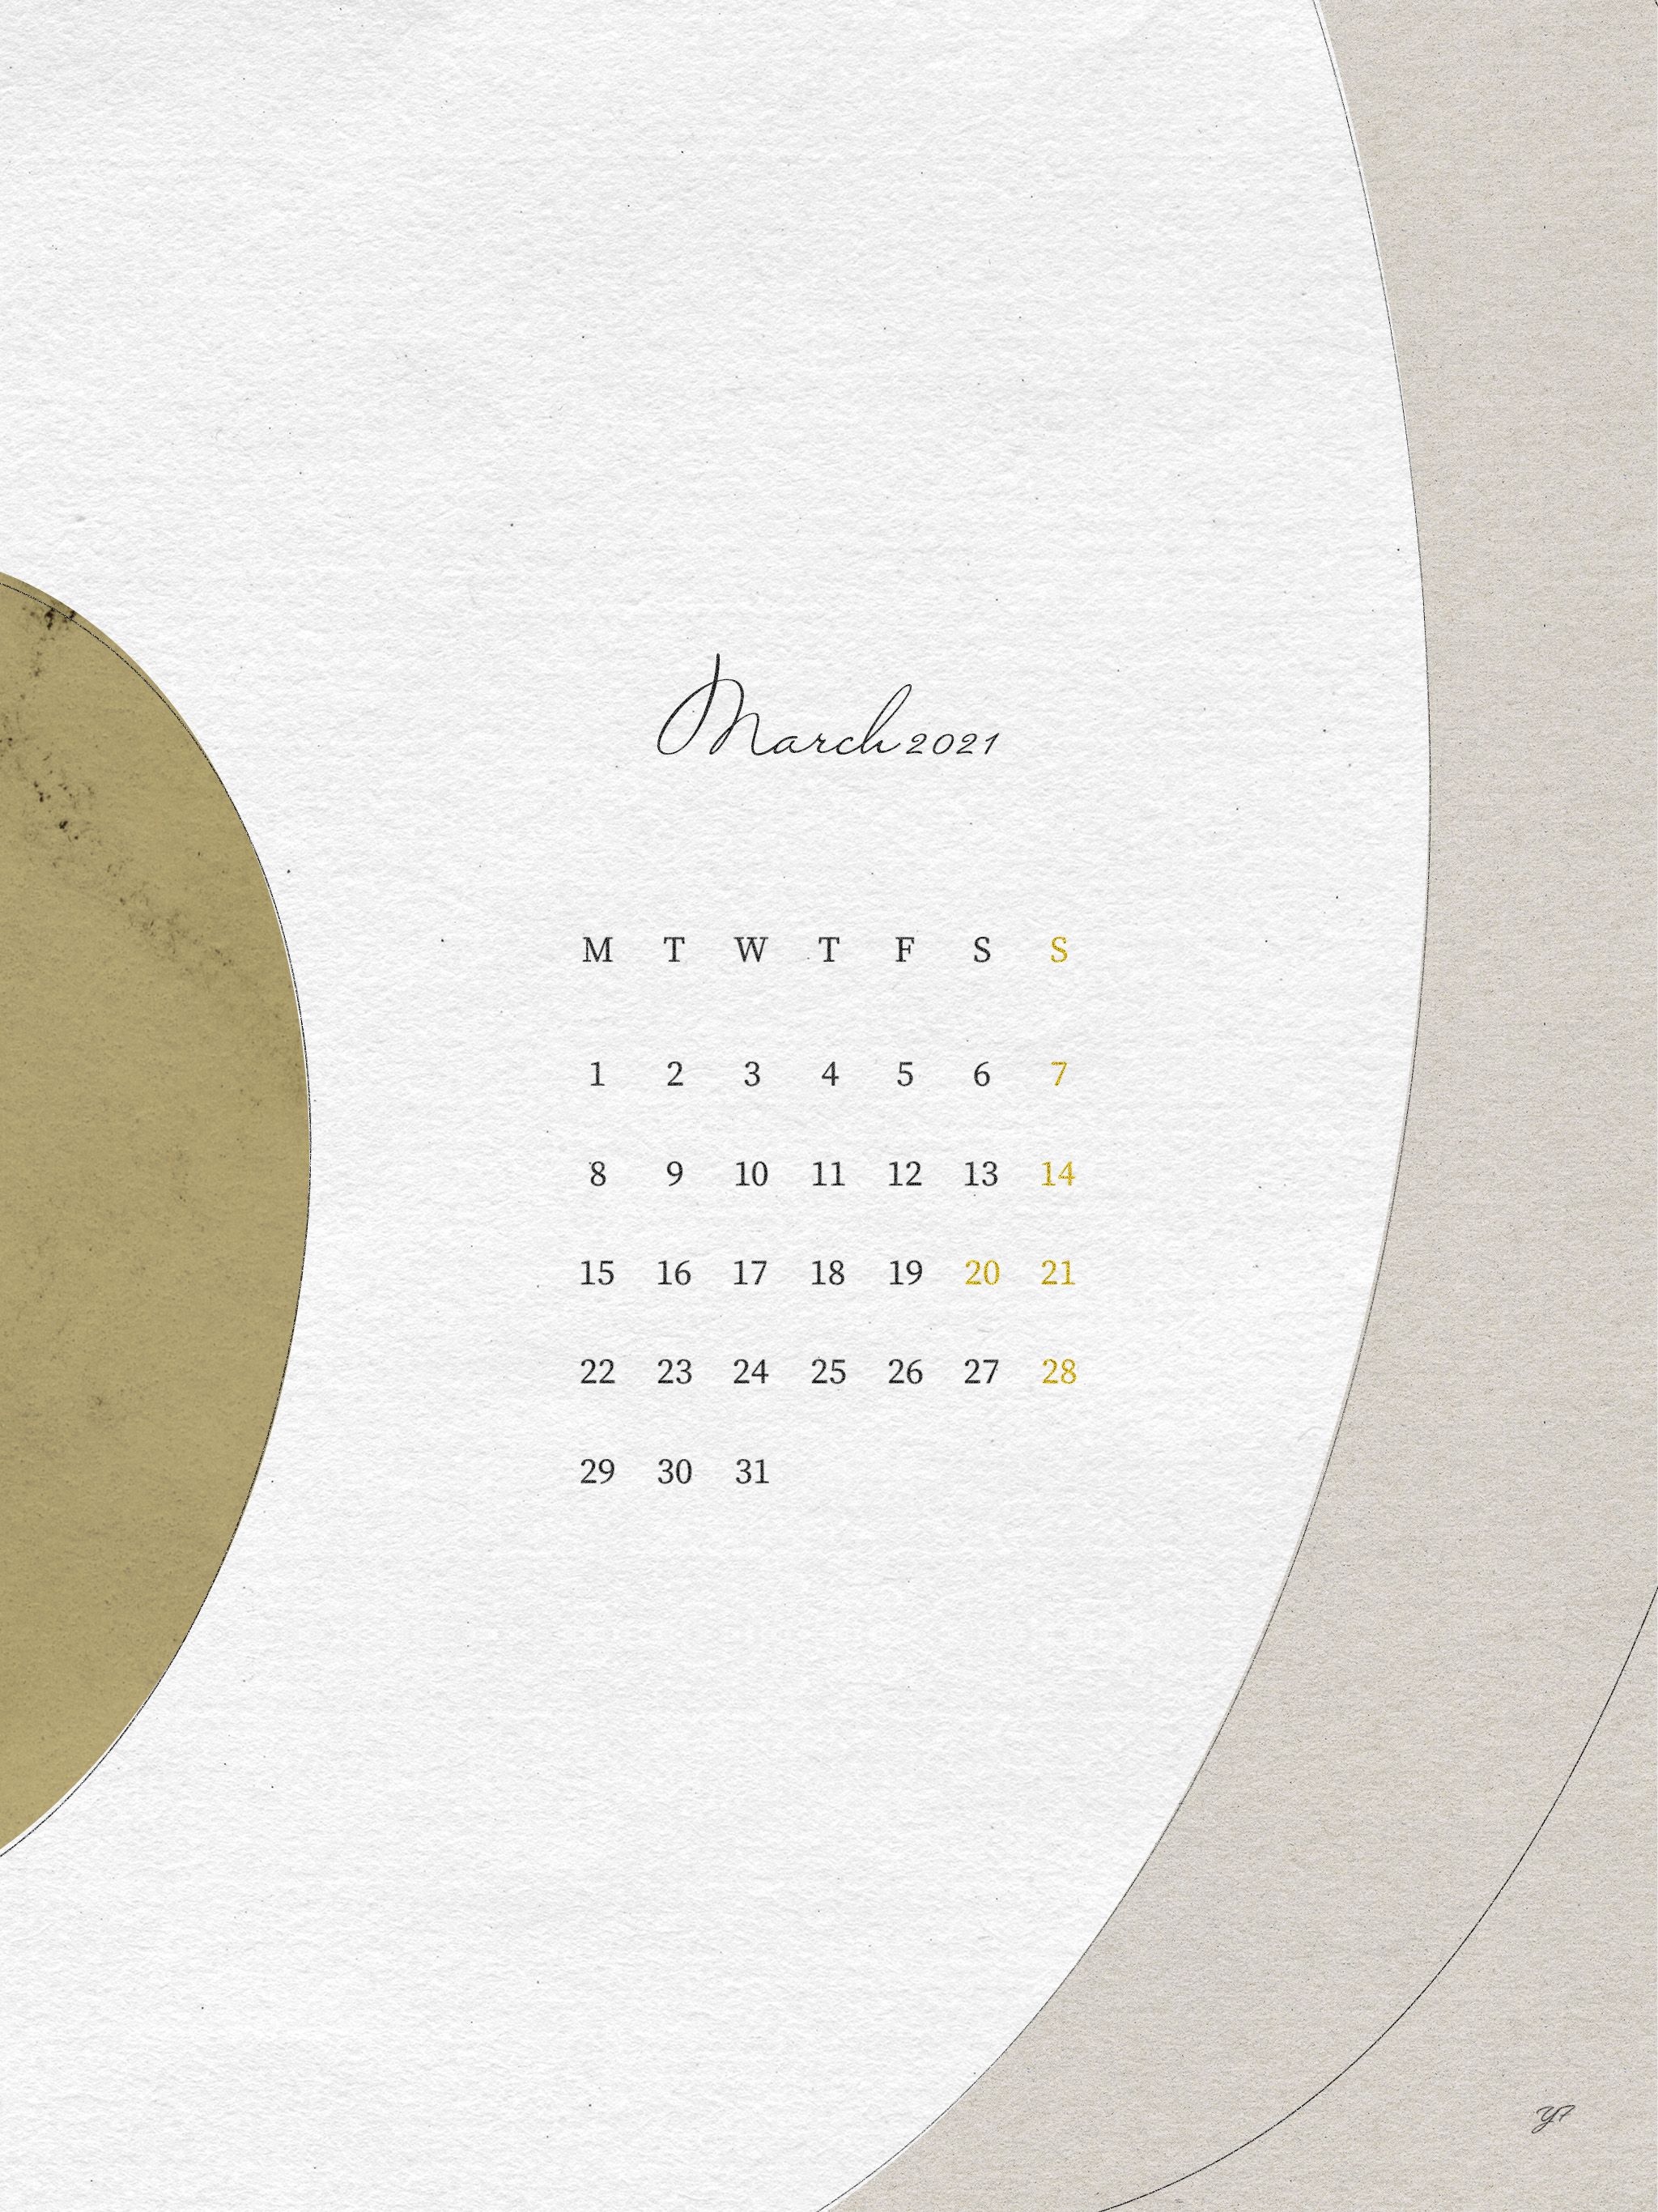 March 21 Calendar Wallpaper For The Ipad Design By Yf